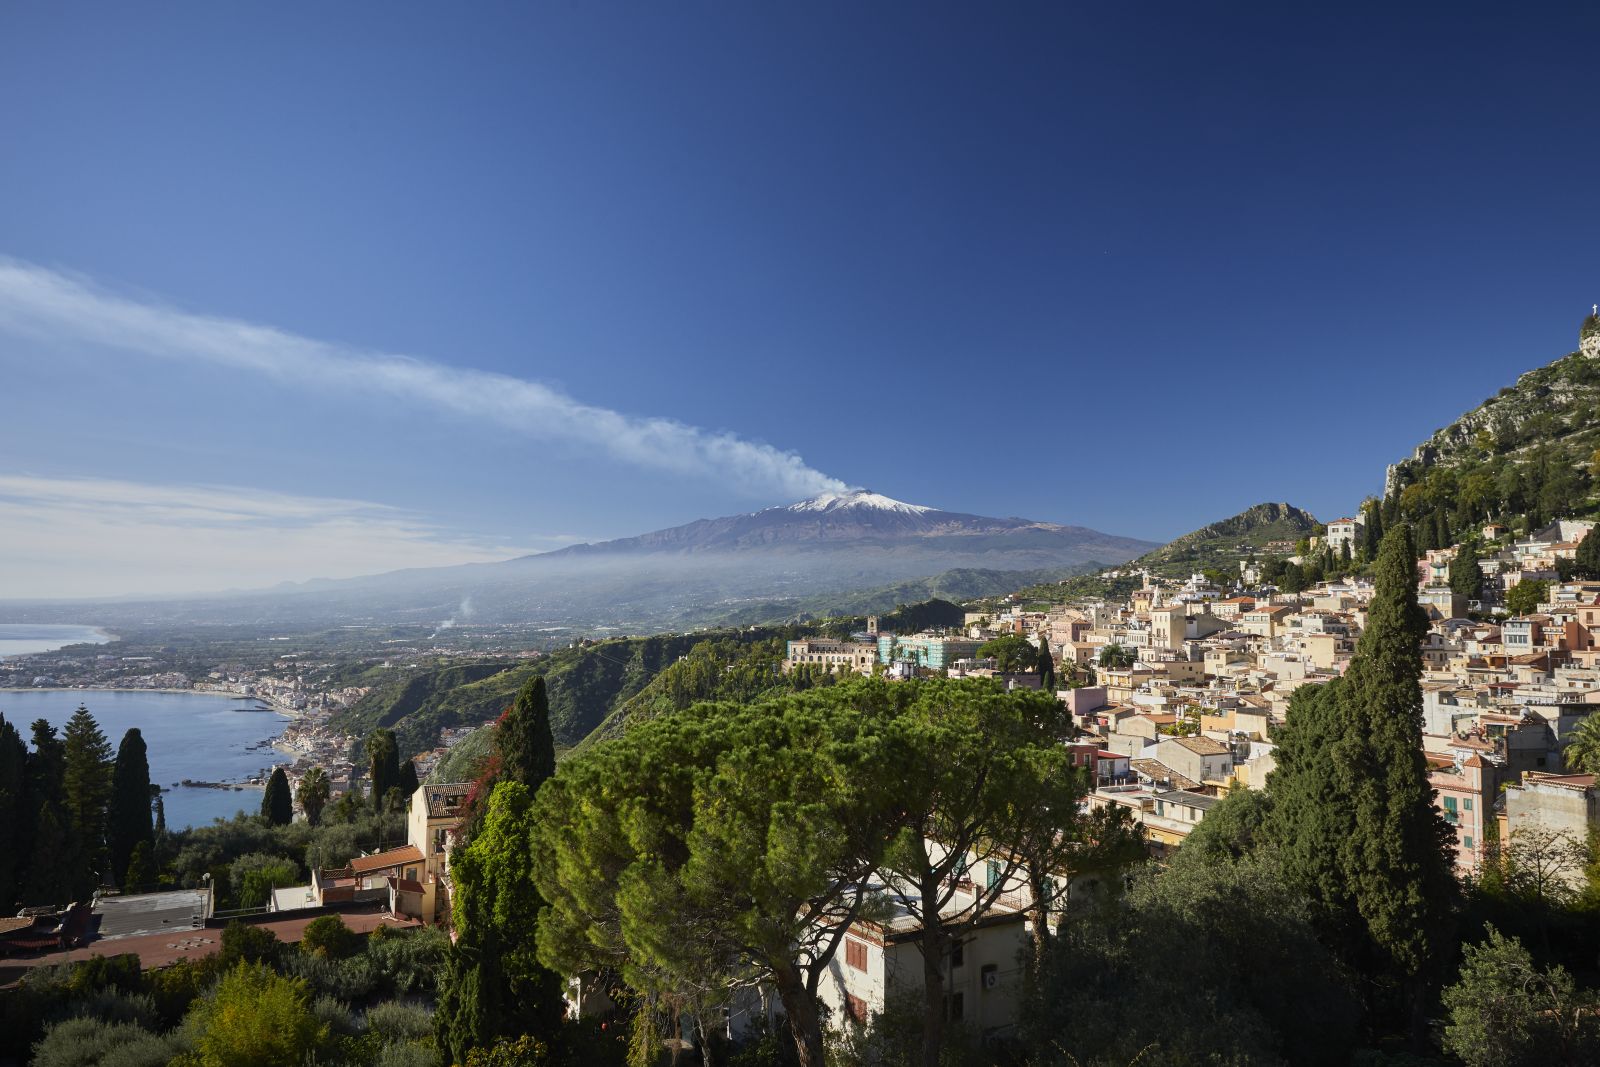 View of Mount Etna from the Belmond Grand Hotel Timeo in Sicily